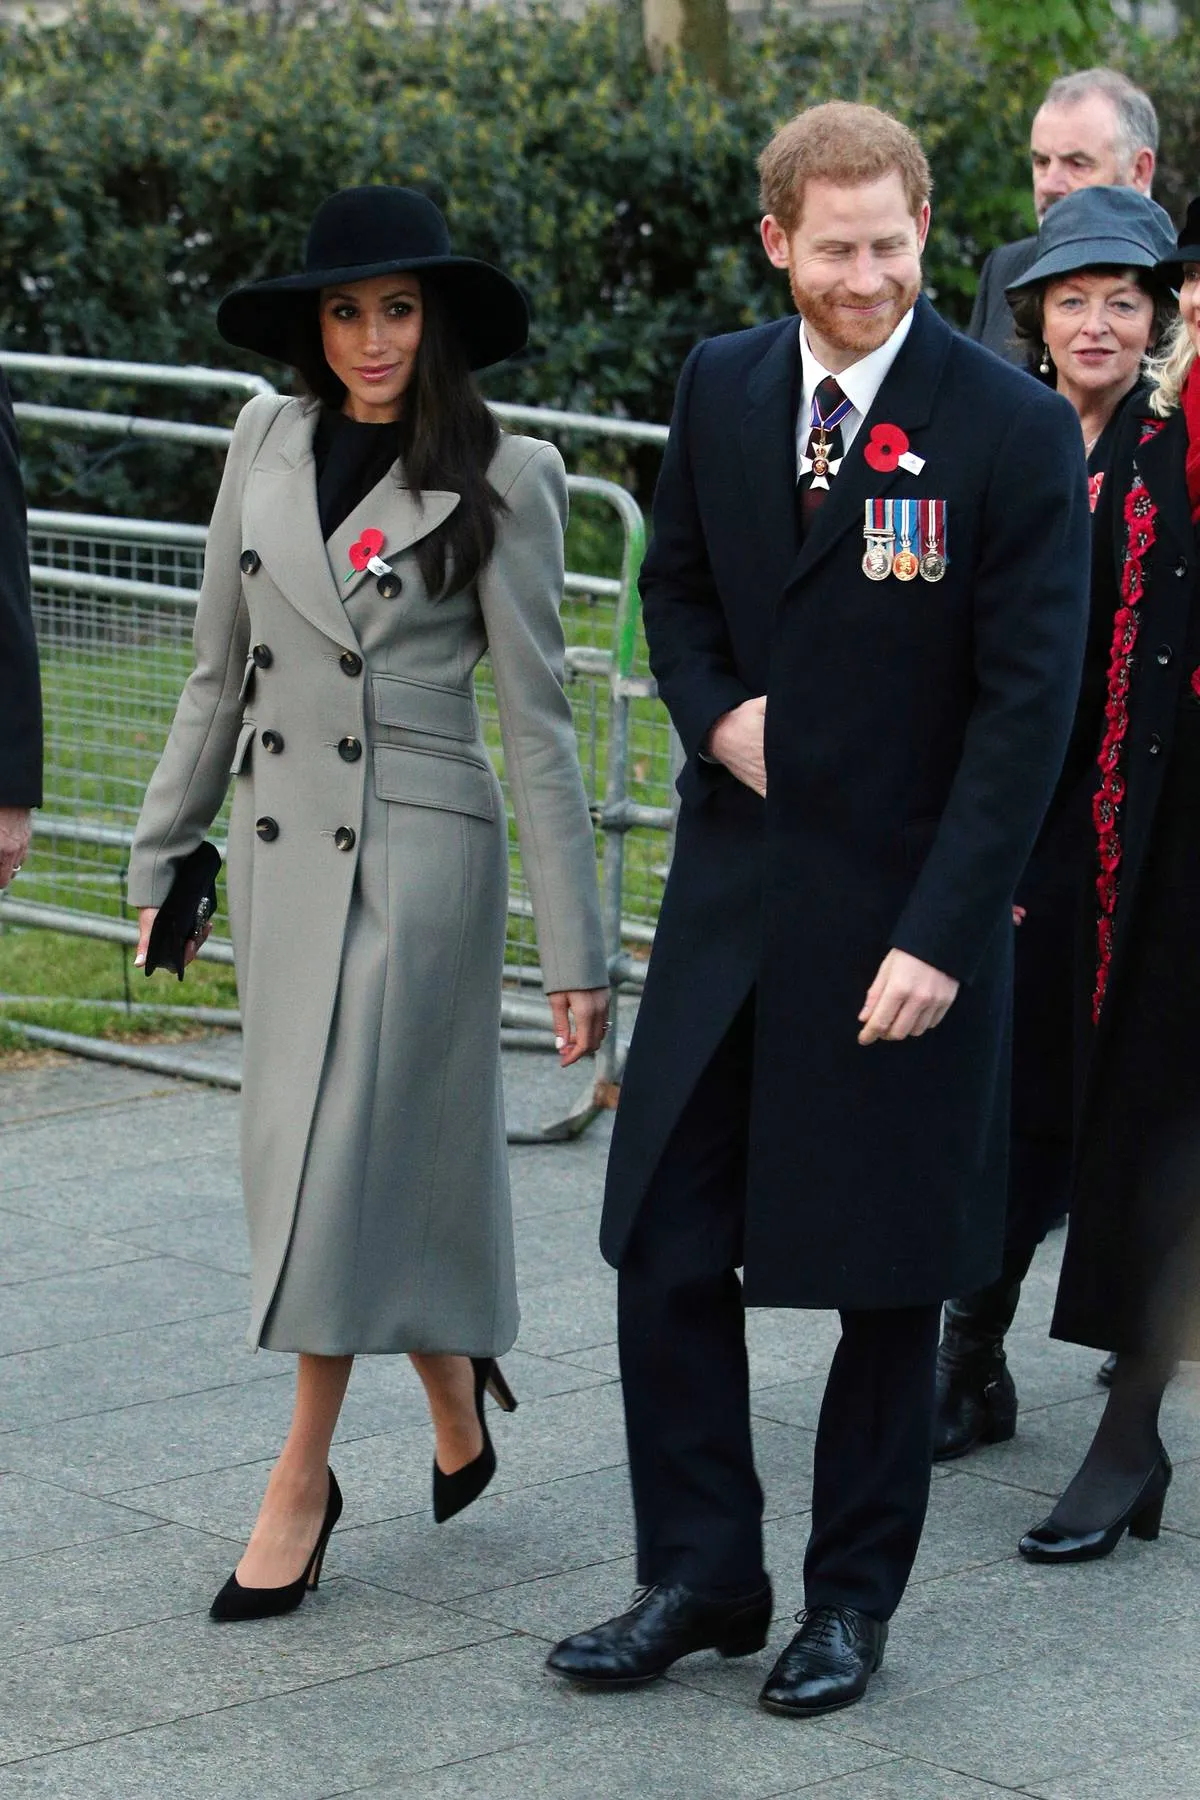 Meghan Markle walks with Prince Harry to Hyde Park, while she wears a black hat and grey coat.